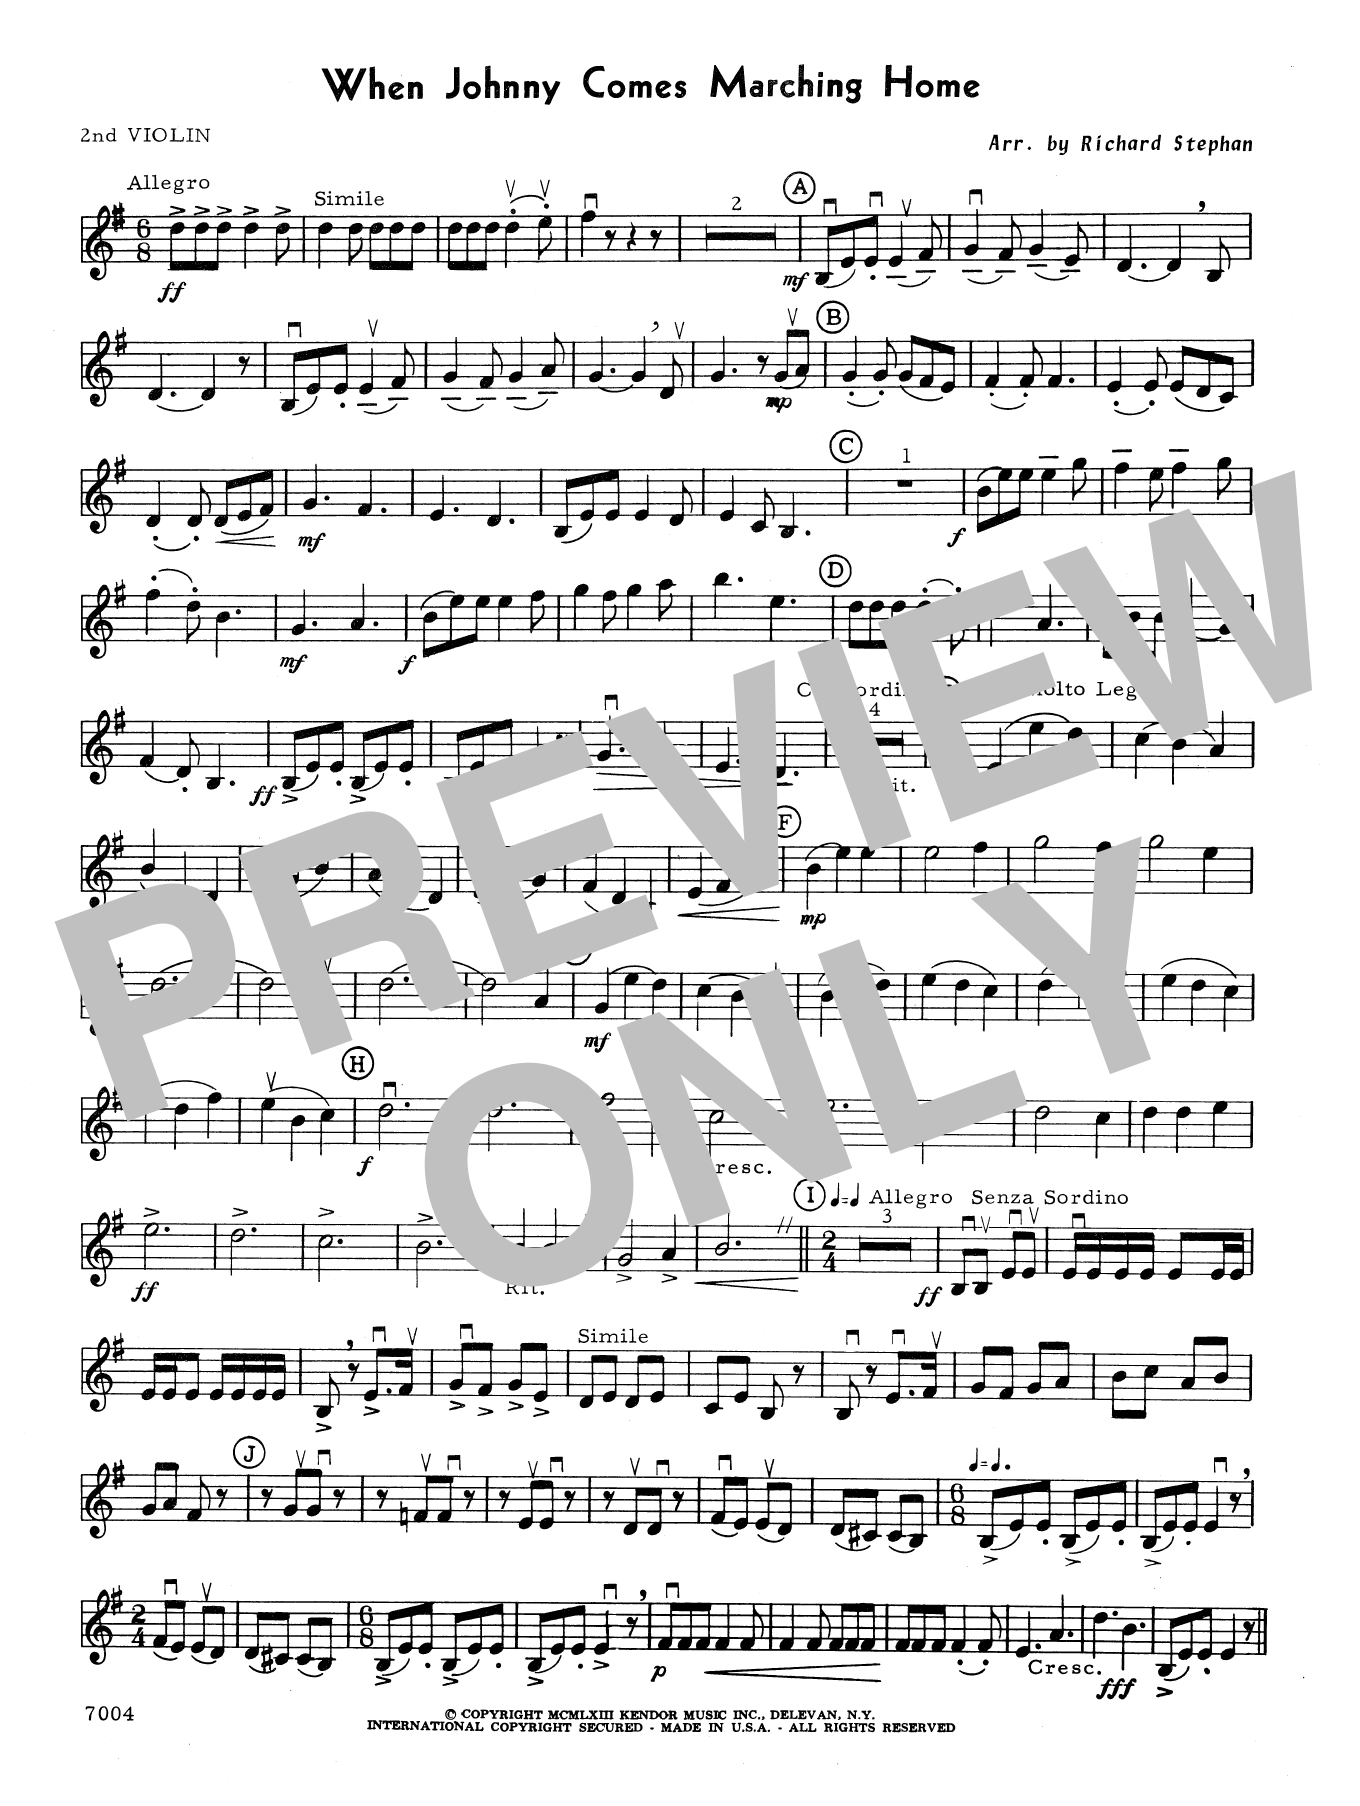 Download Richard Stephan When Johnny Comes Marching Home - 2nd V Sheet Music